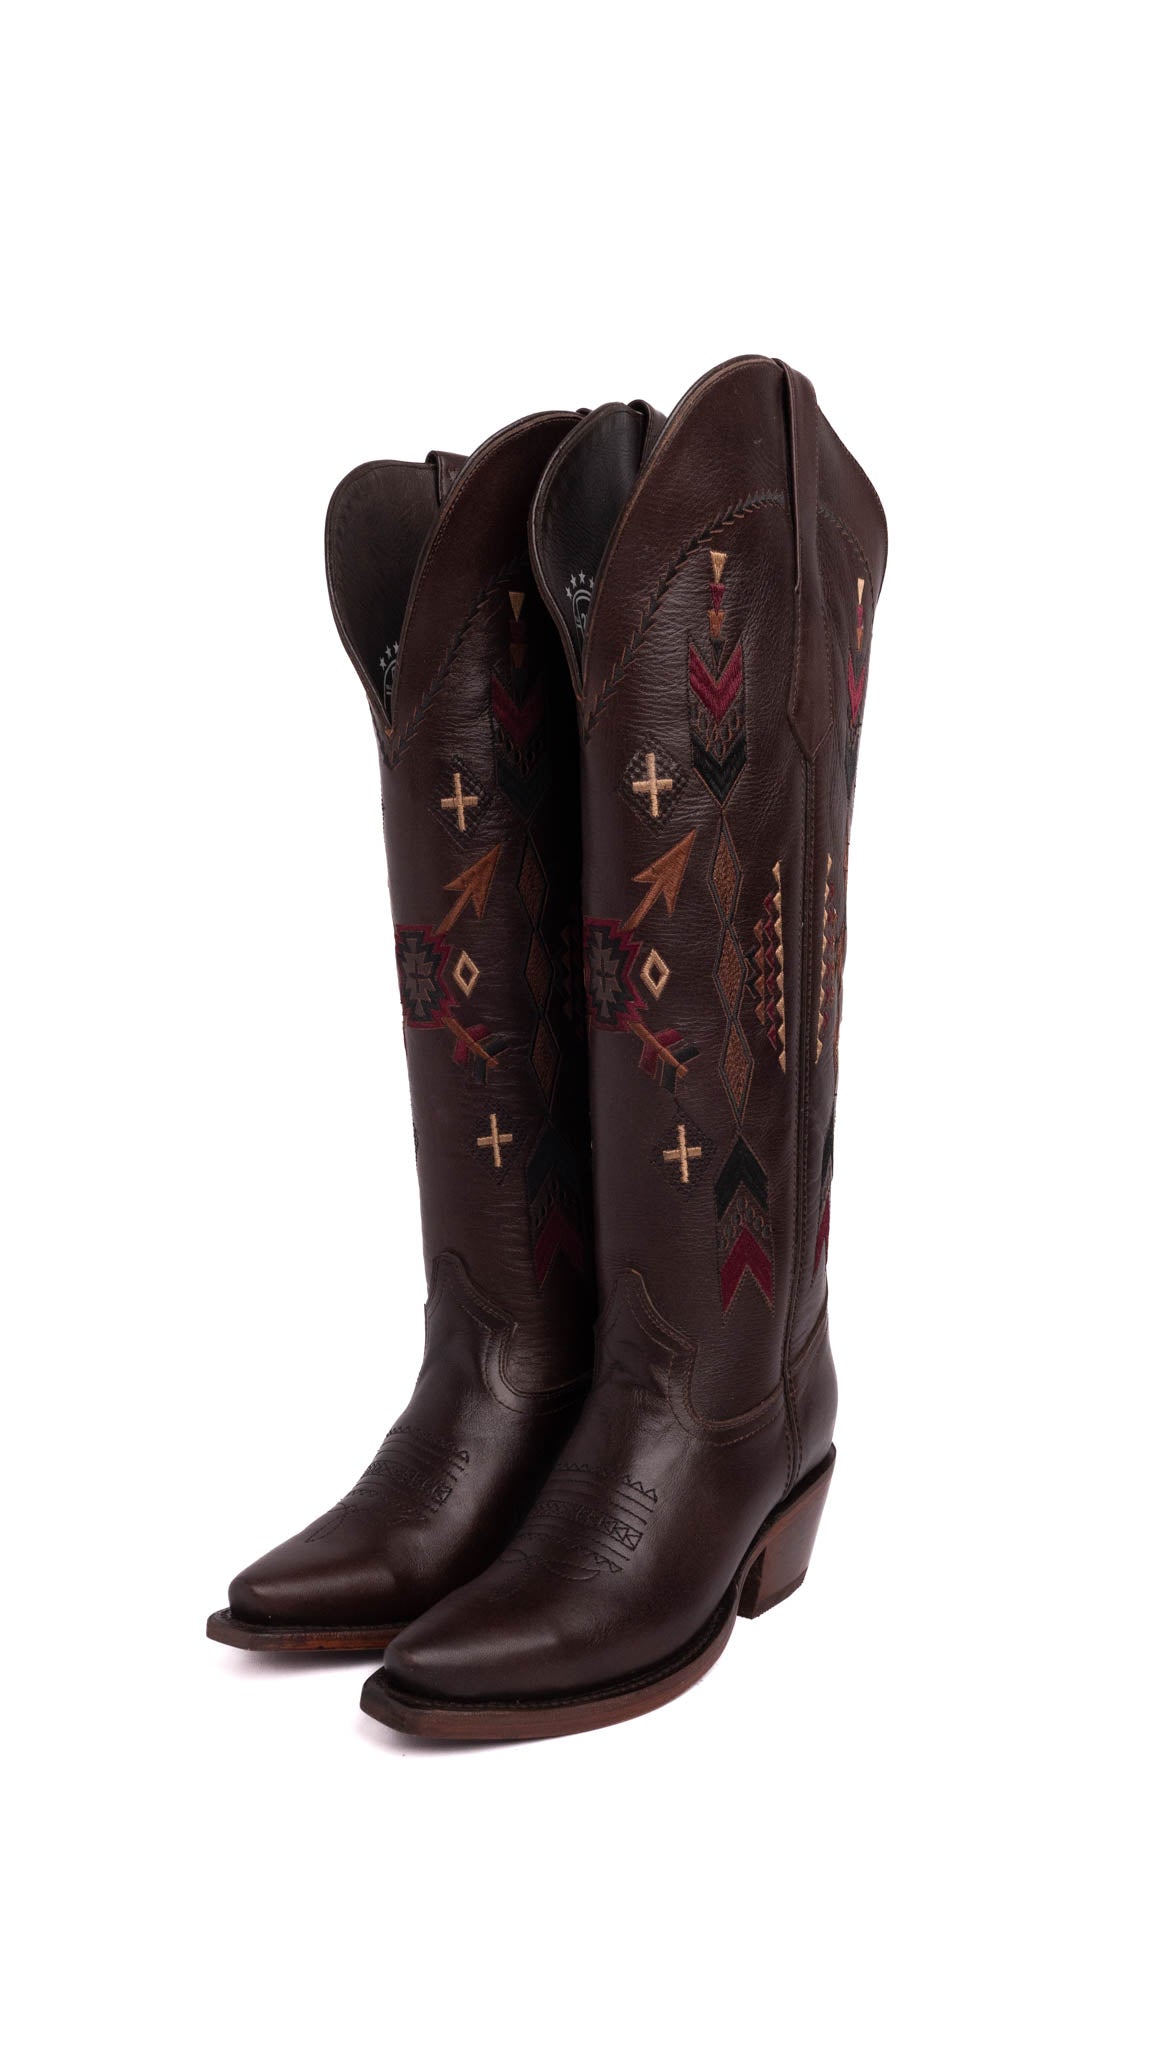 Azteck Edition Wide Calf Friendly Tall Snip Toe Cowgirl Boots